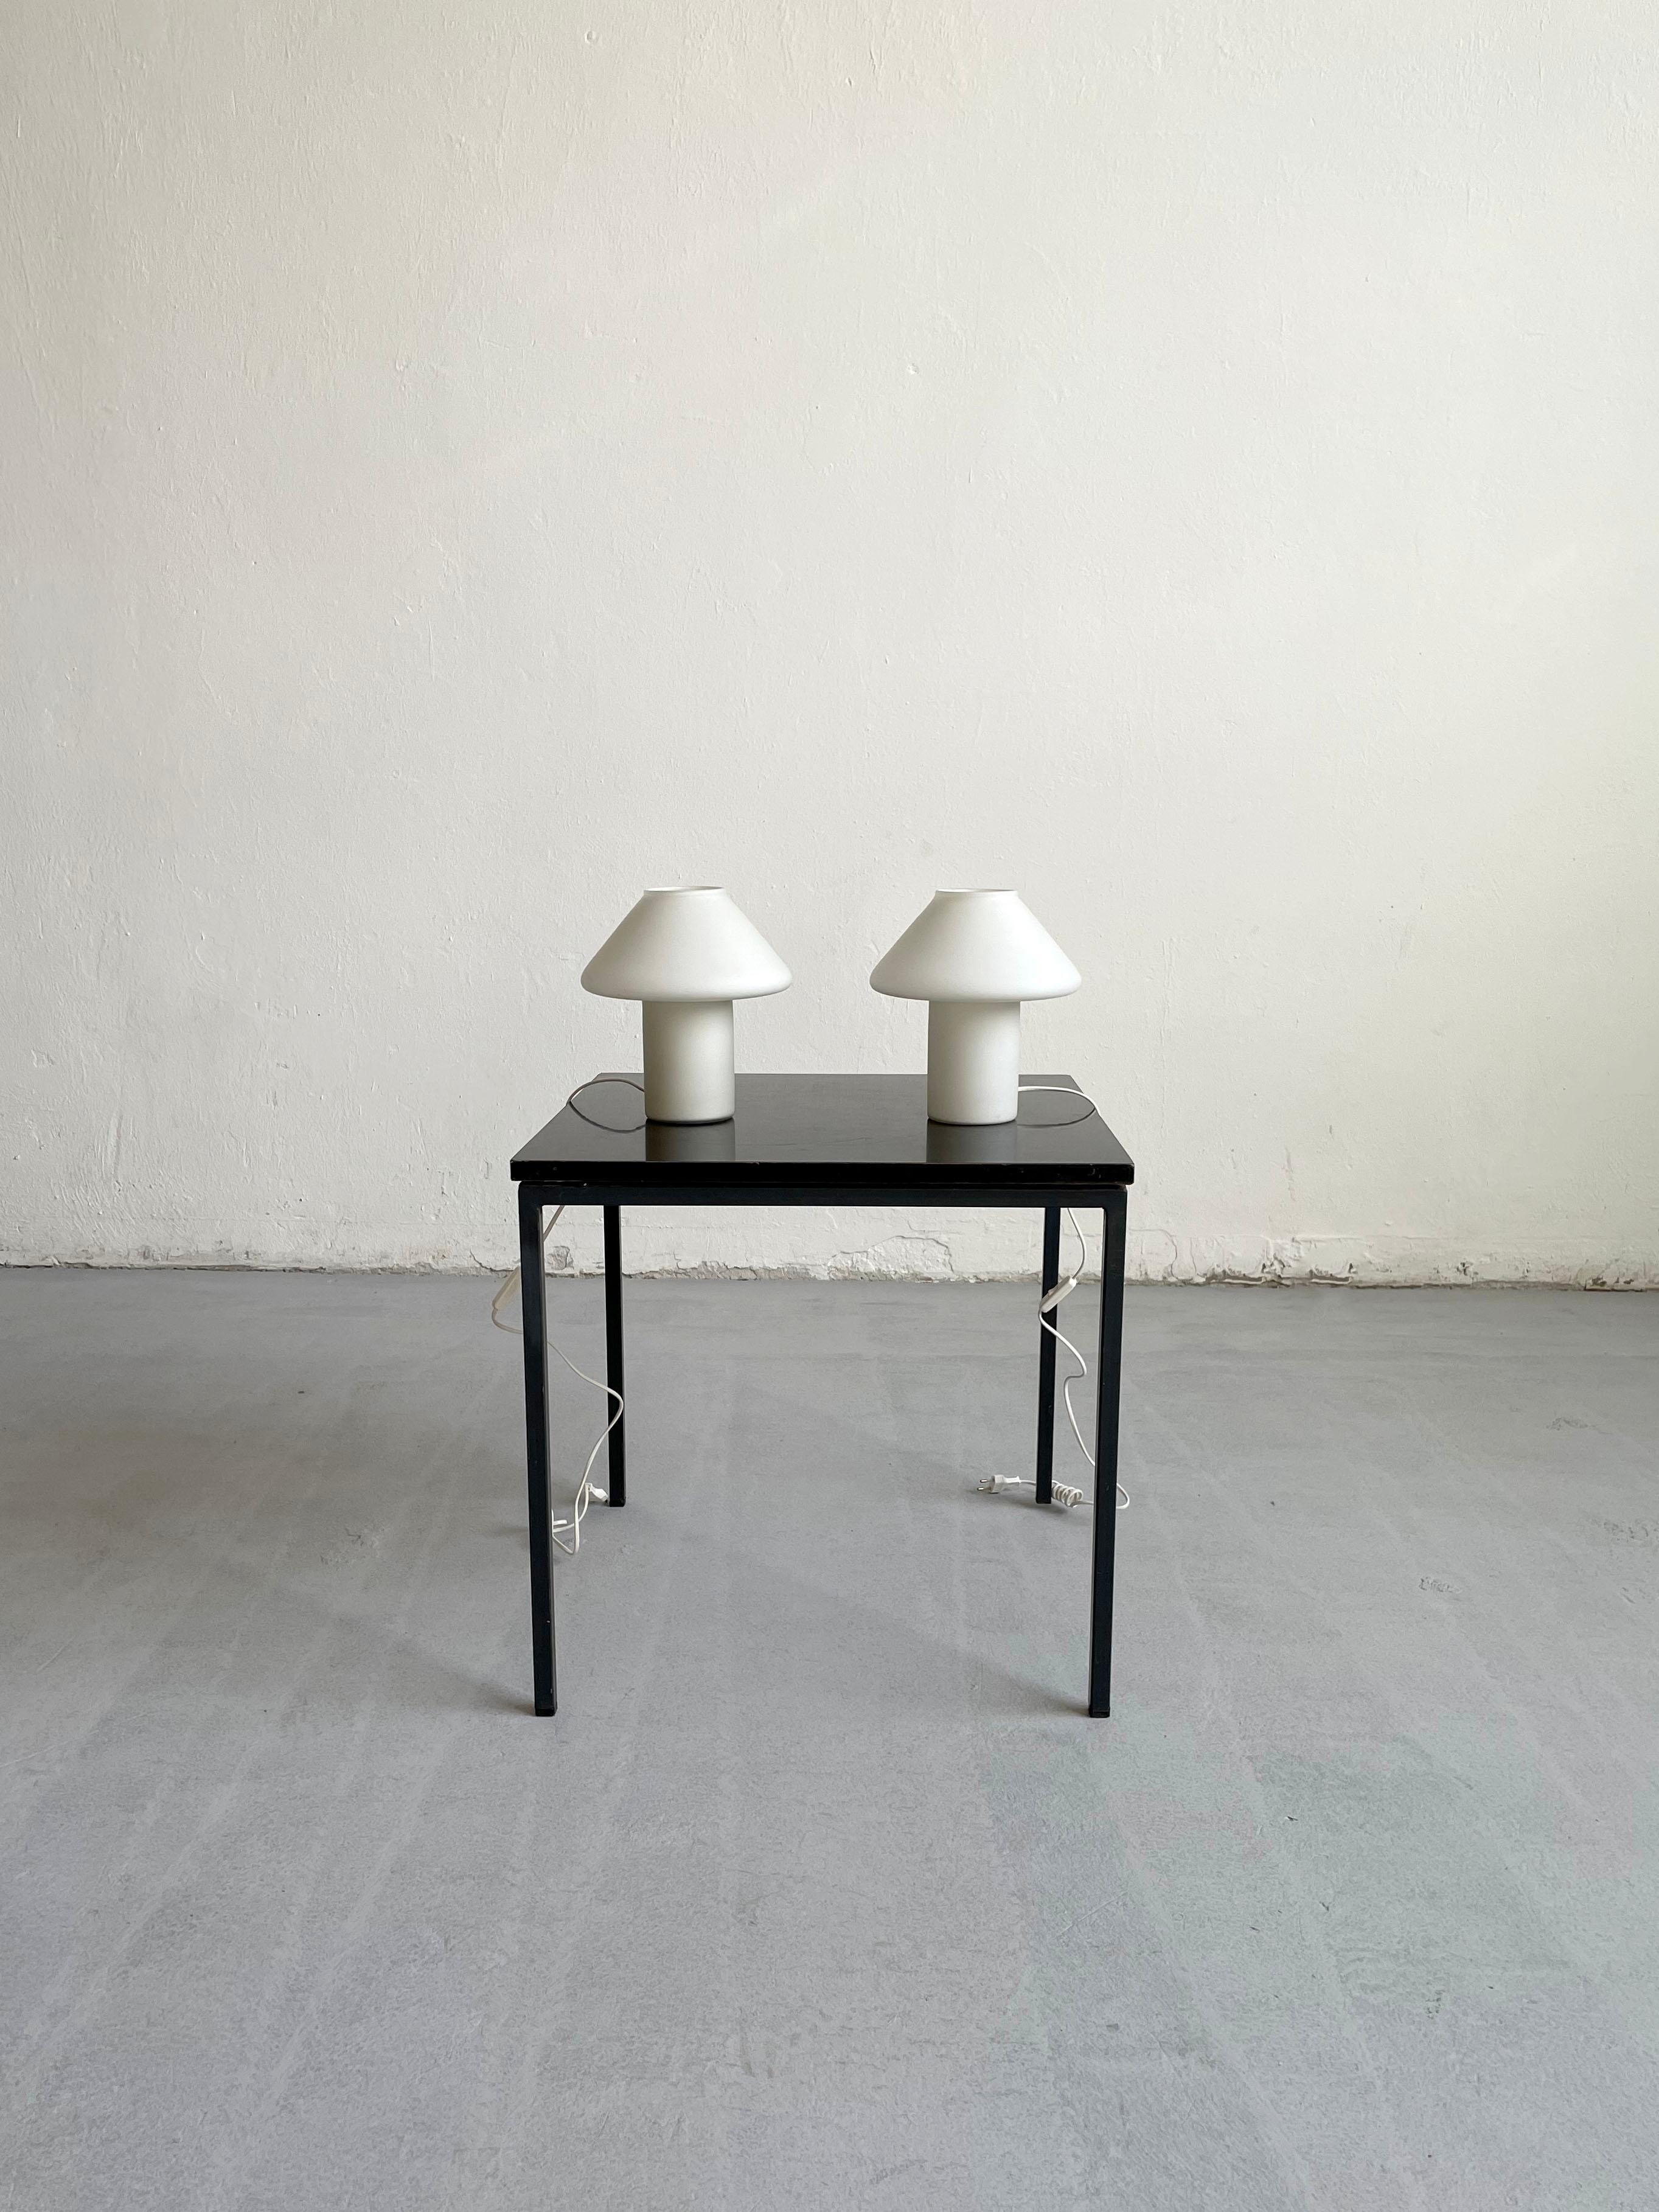 Set of 2 1970s white satin glass mushroom table lamps designed by the Dutch lighting manufacturer Hala Zeist. 
The lamps have a mushroom-shape top design with a cylindrical base. 

The lamps are unmarked.

Each lamp has one E14 lamp socket and an